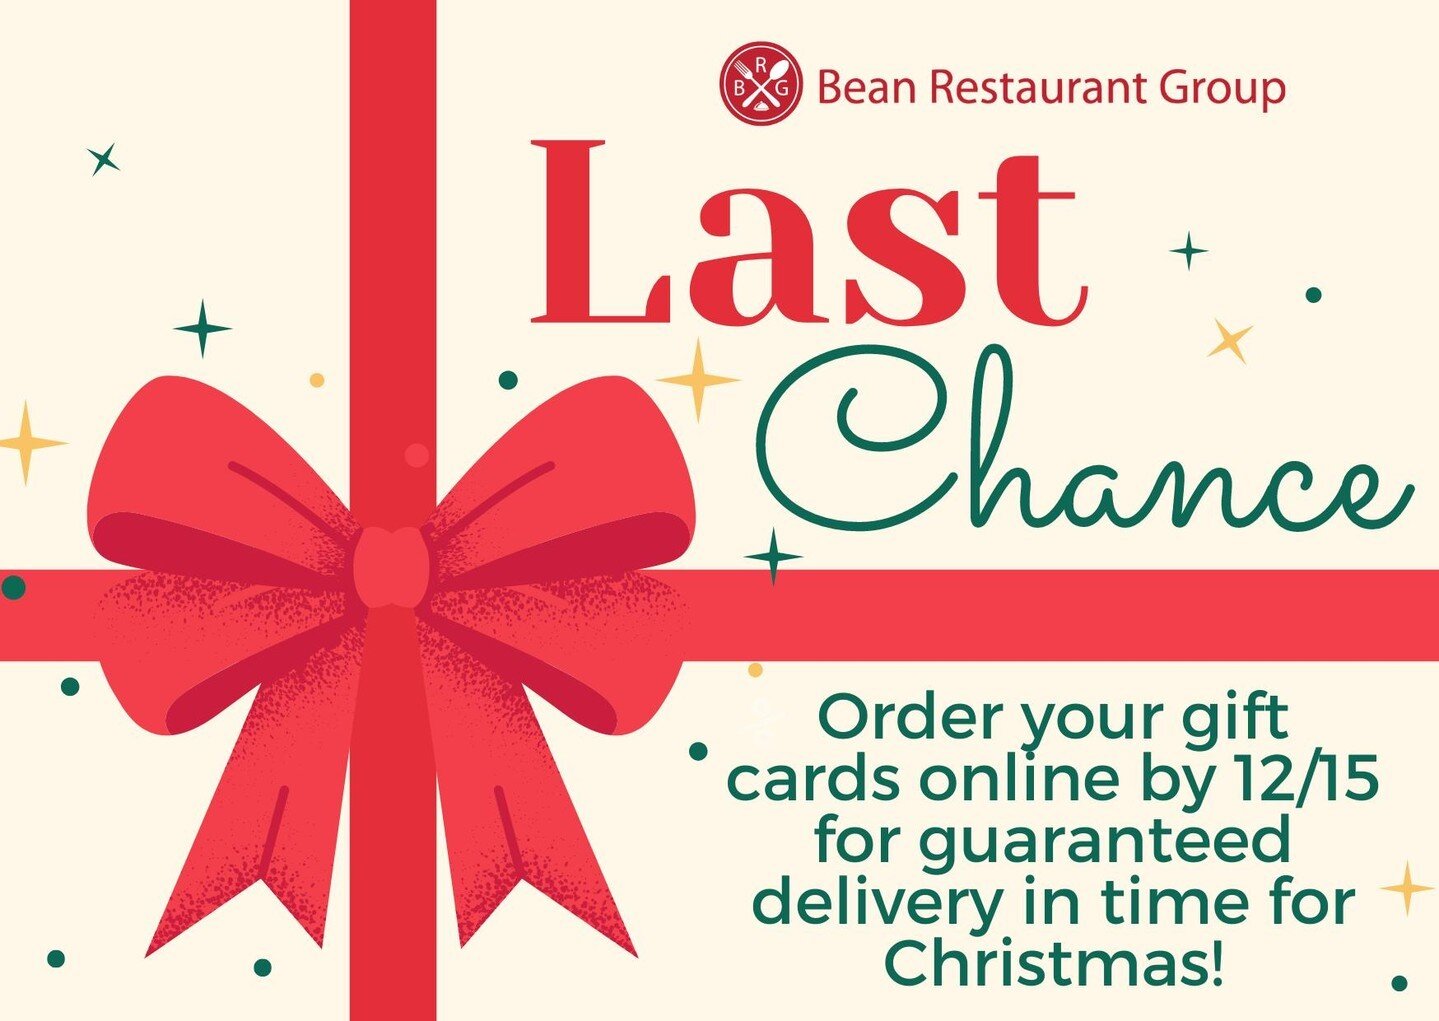 🎁✨ Time's running out for the perfect gift! 🚚 Order your gift cards online at beanrg.com by 12/15 for guaranteed Christmas delivery. 🎄 #GiftCards #LastMinuteGifts #ShopOnline #ChristmasDelivery #BeanRG 🛍️🎅